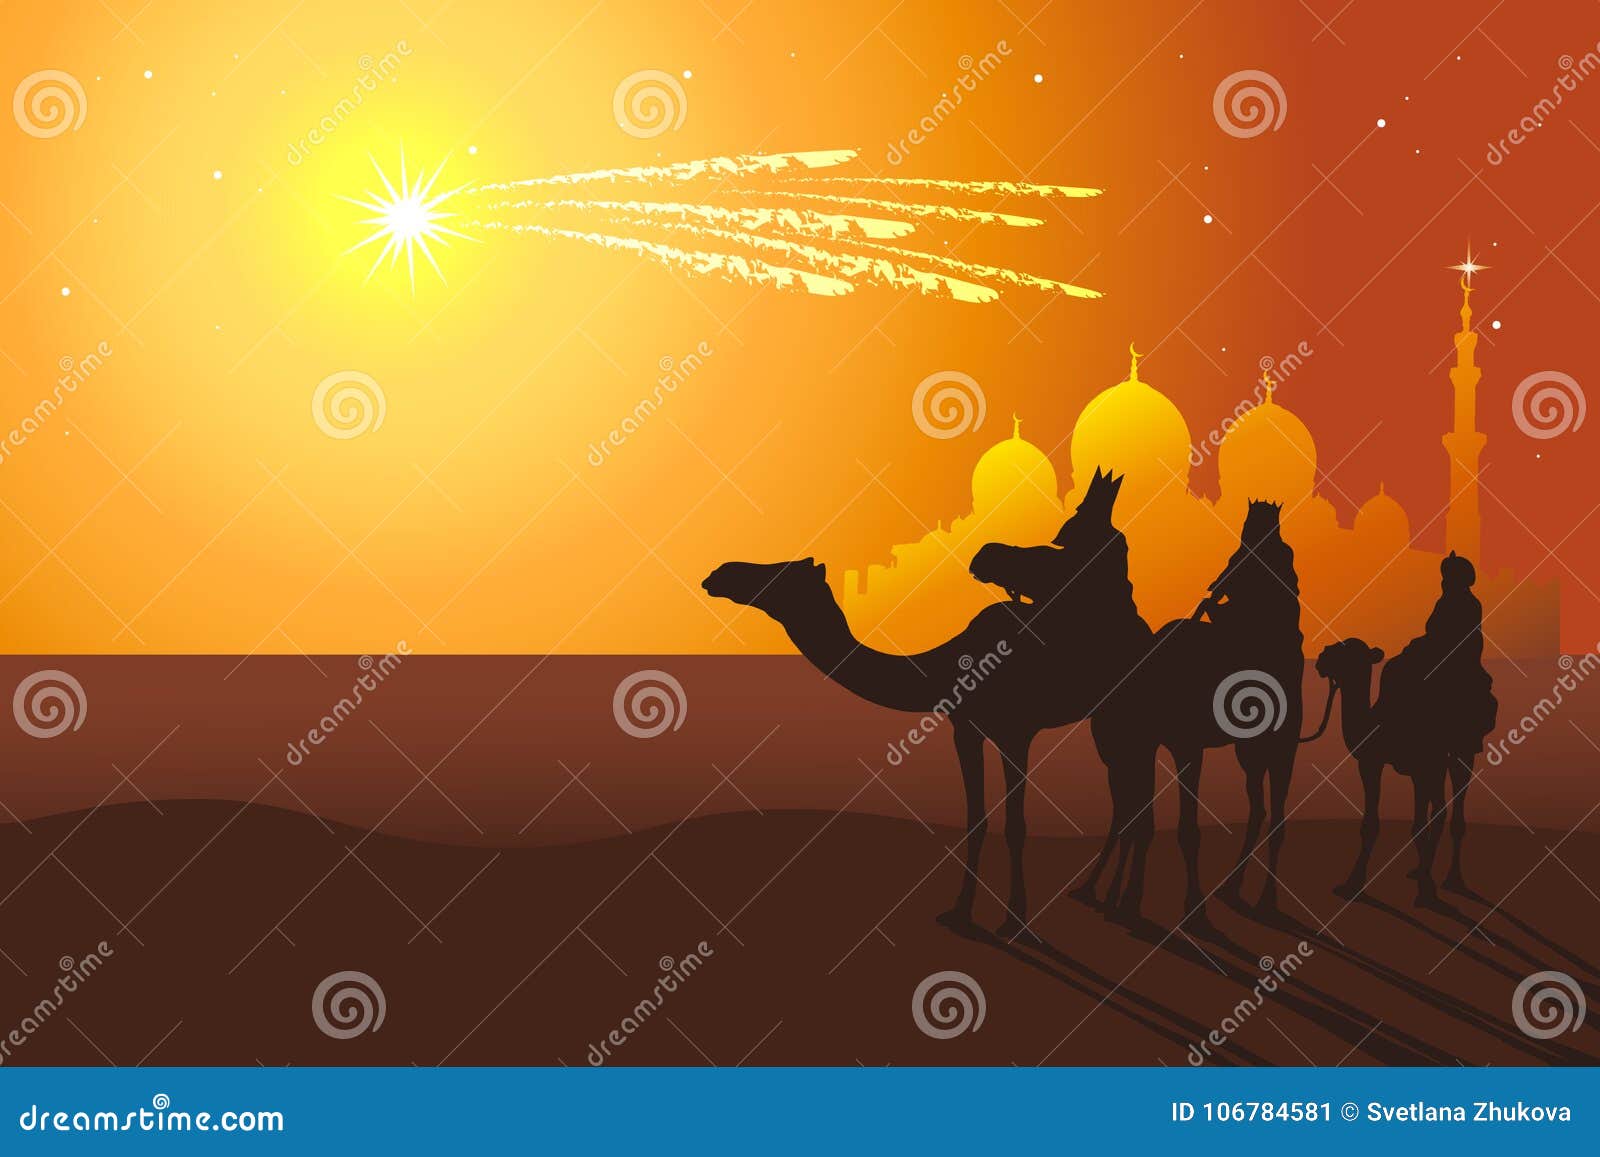 three kings ride camels from oriental countries